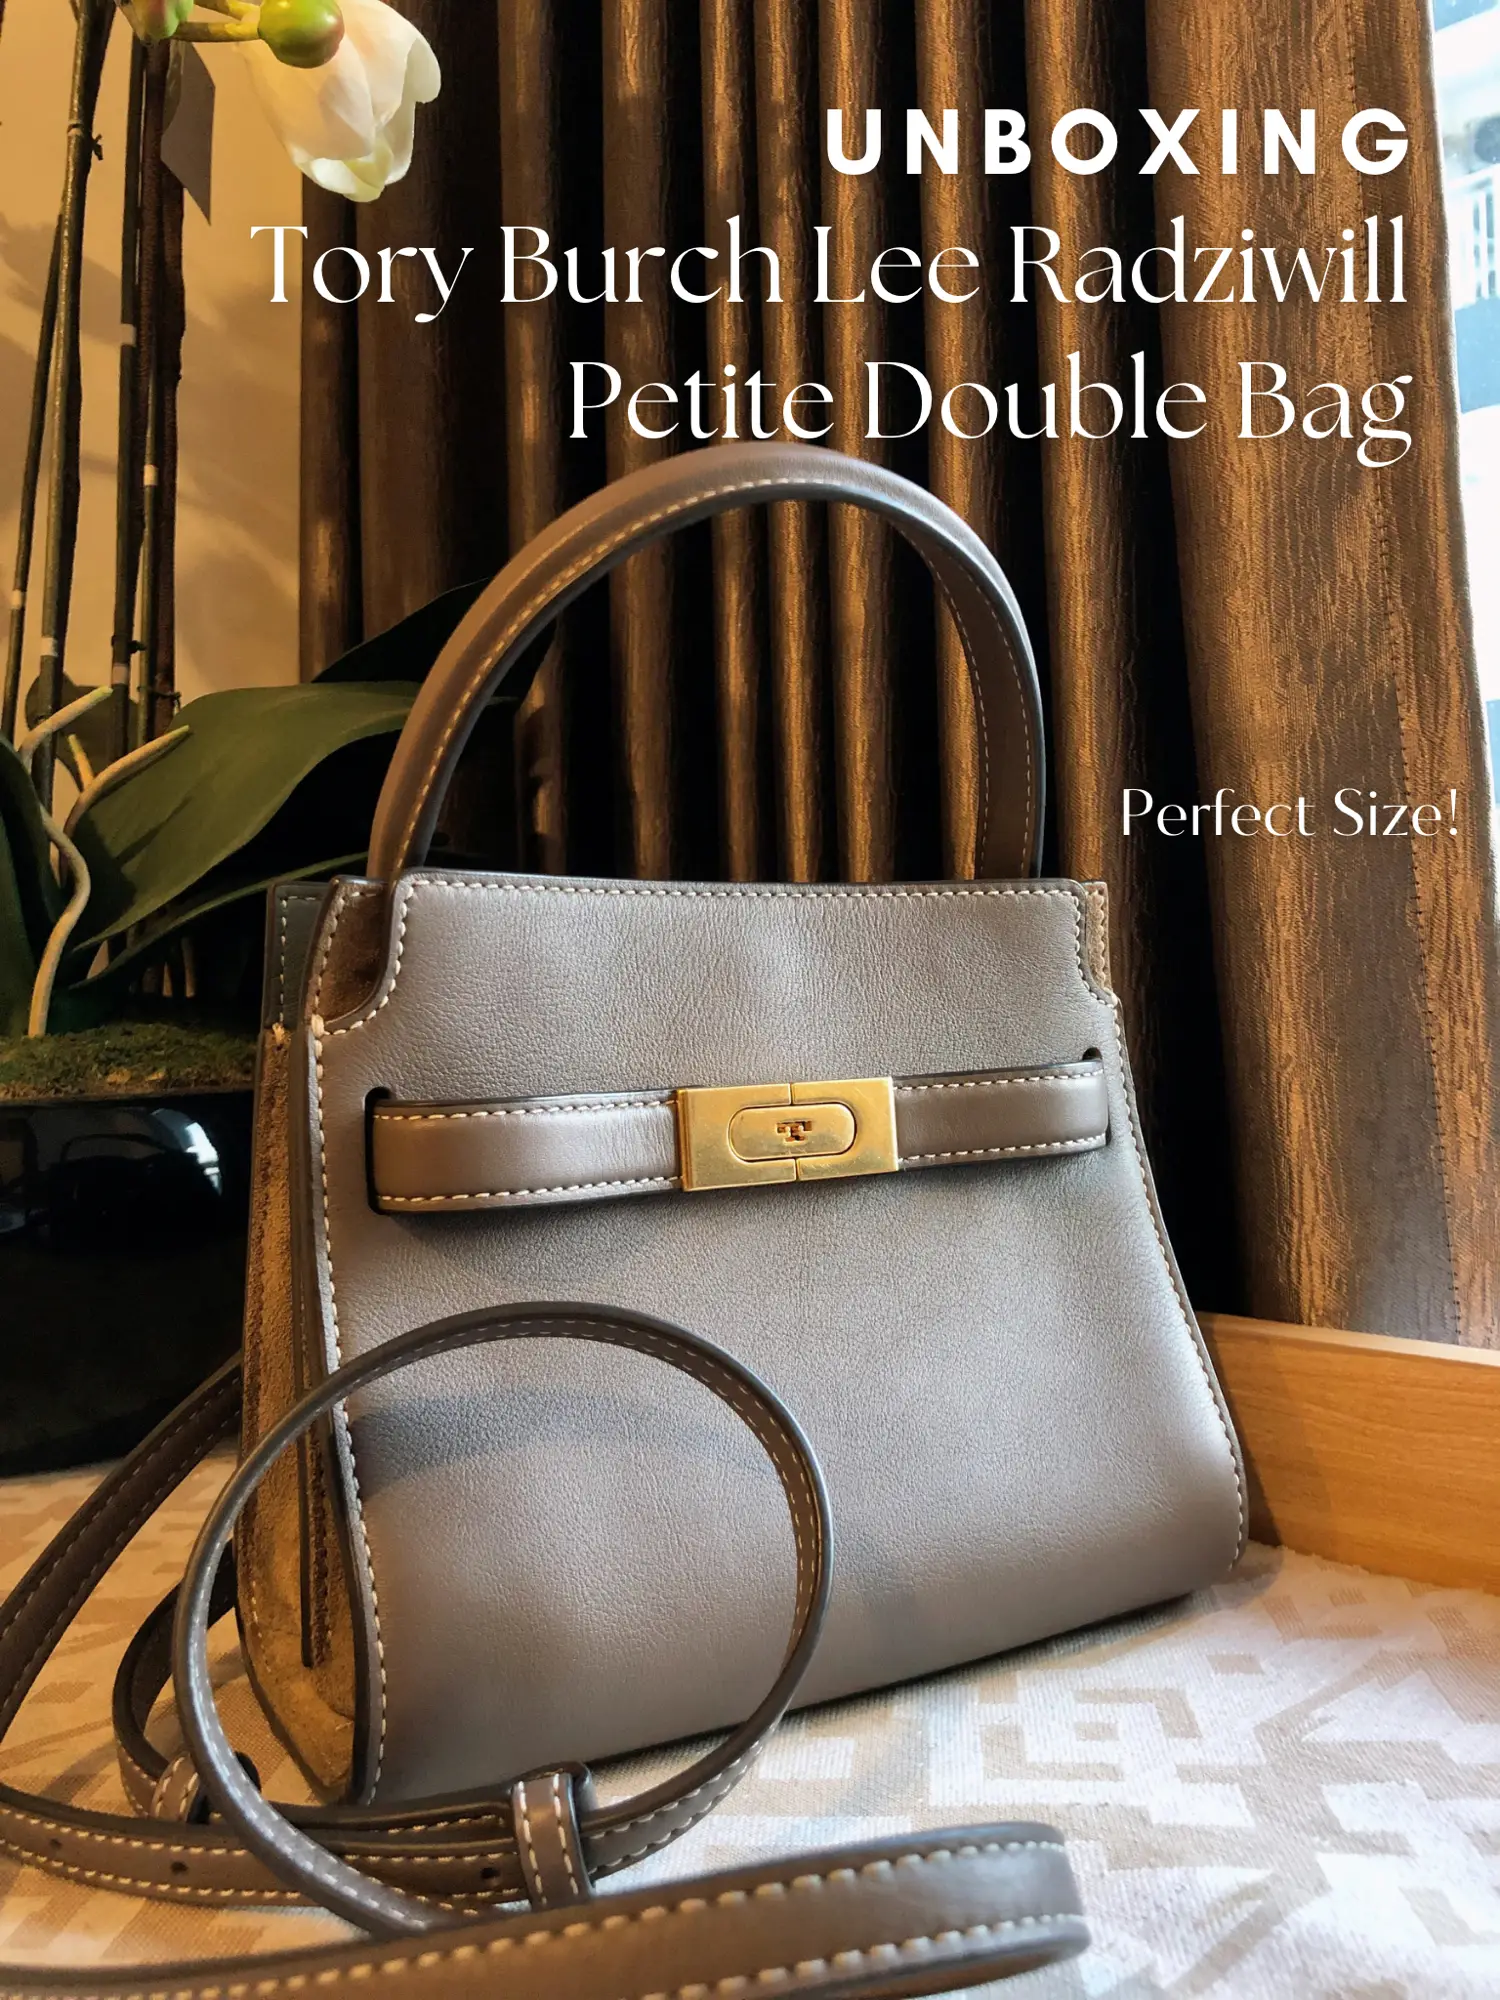 Unboxing Tory Burch Lee Radziwill Small Bag